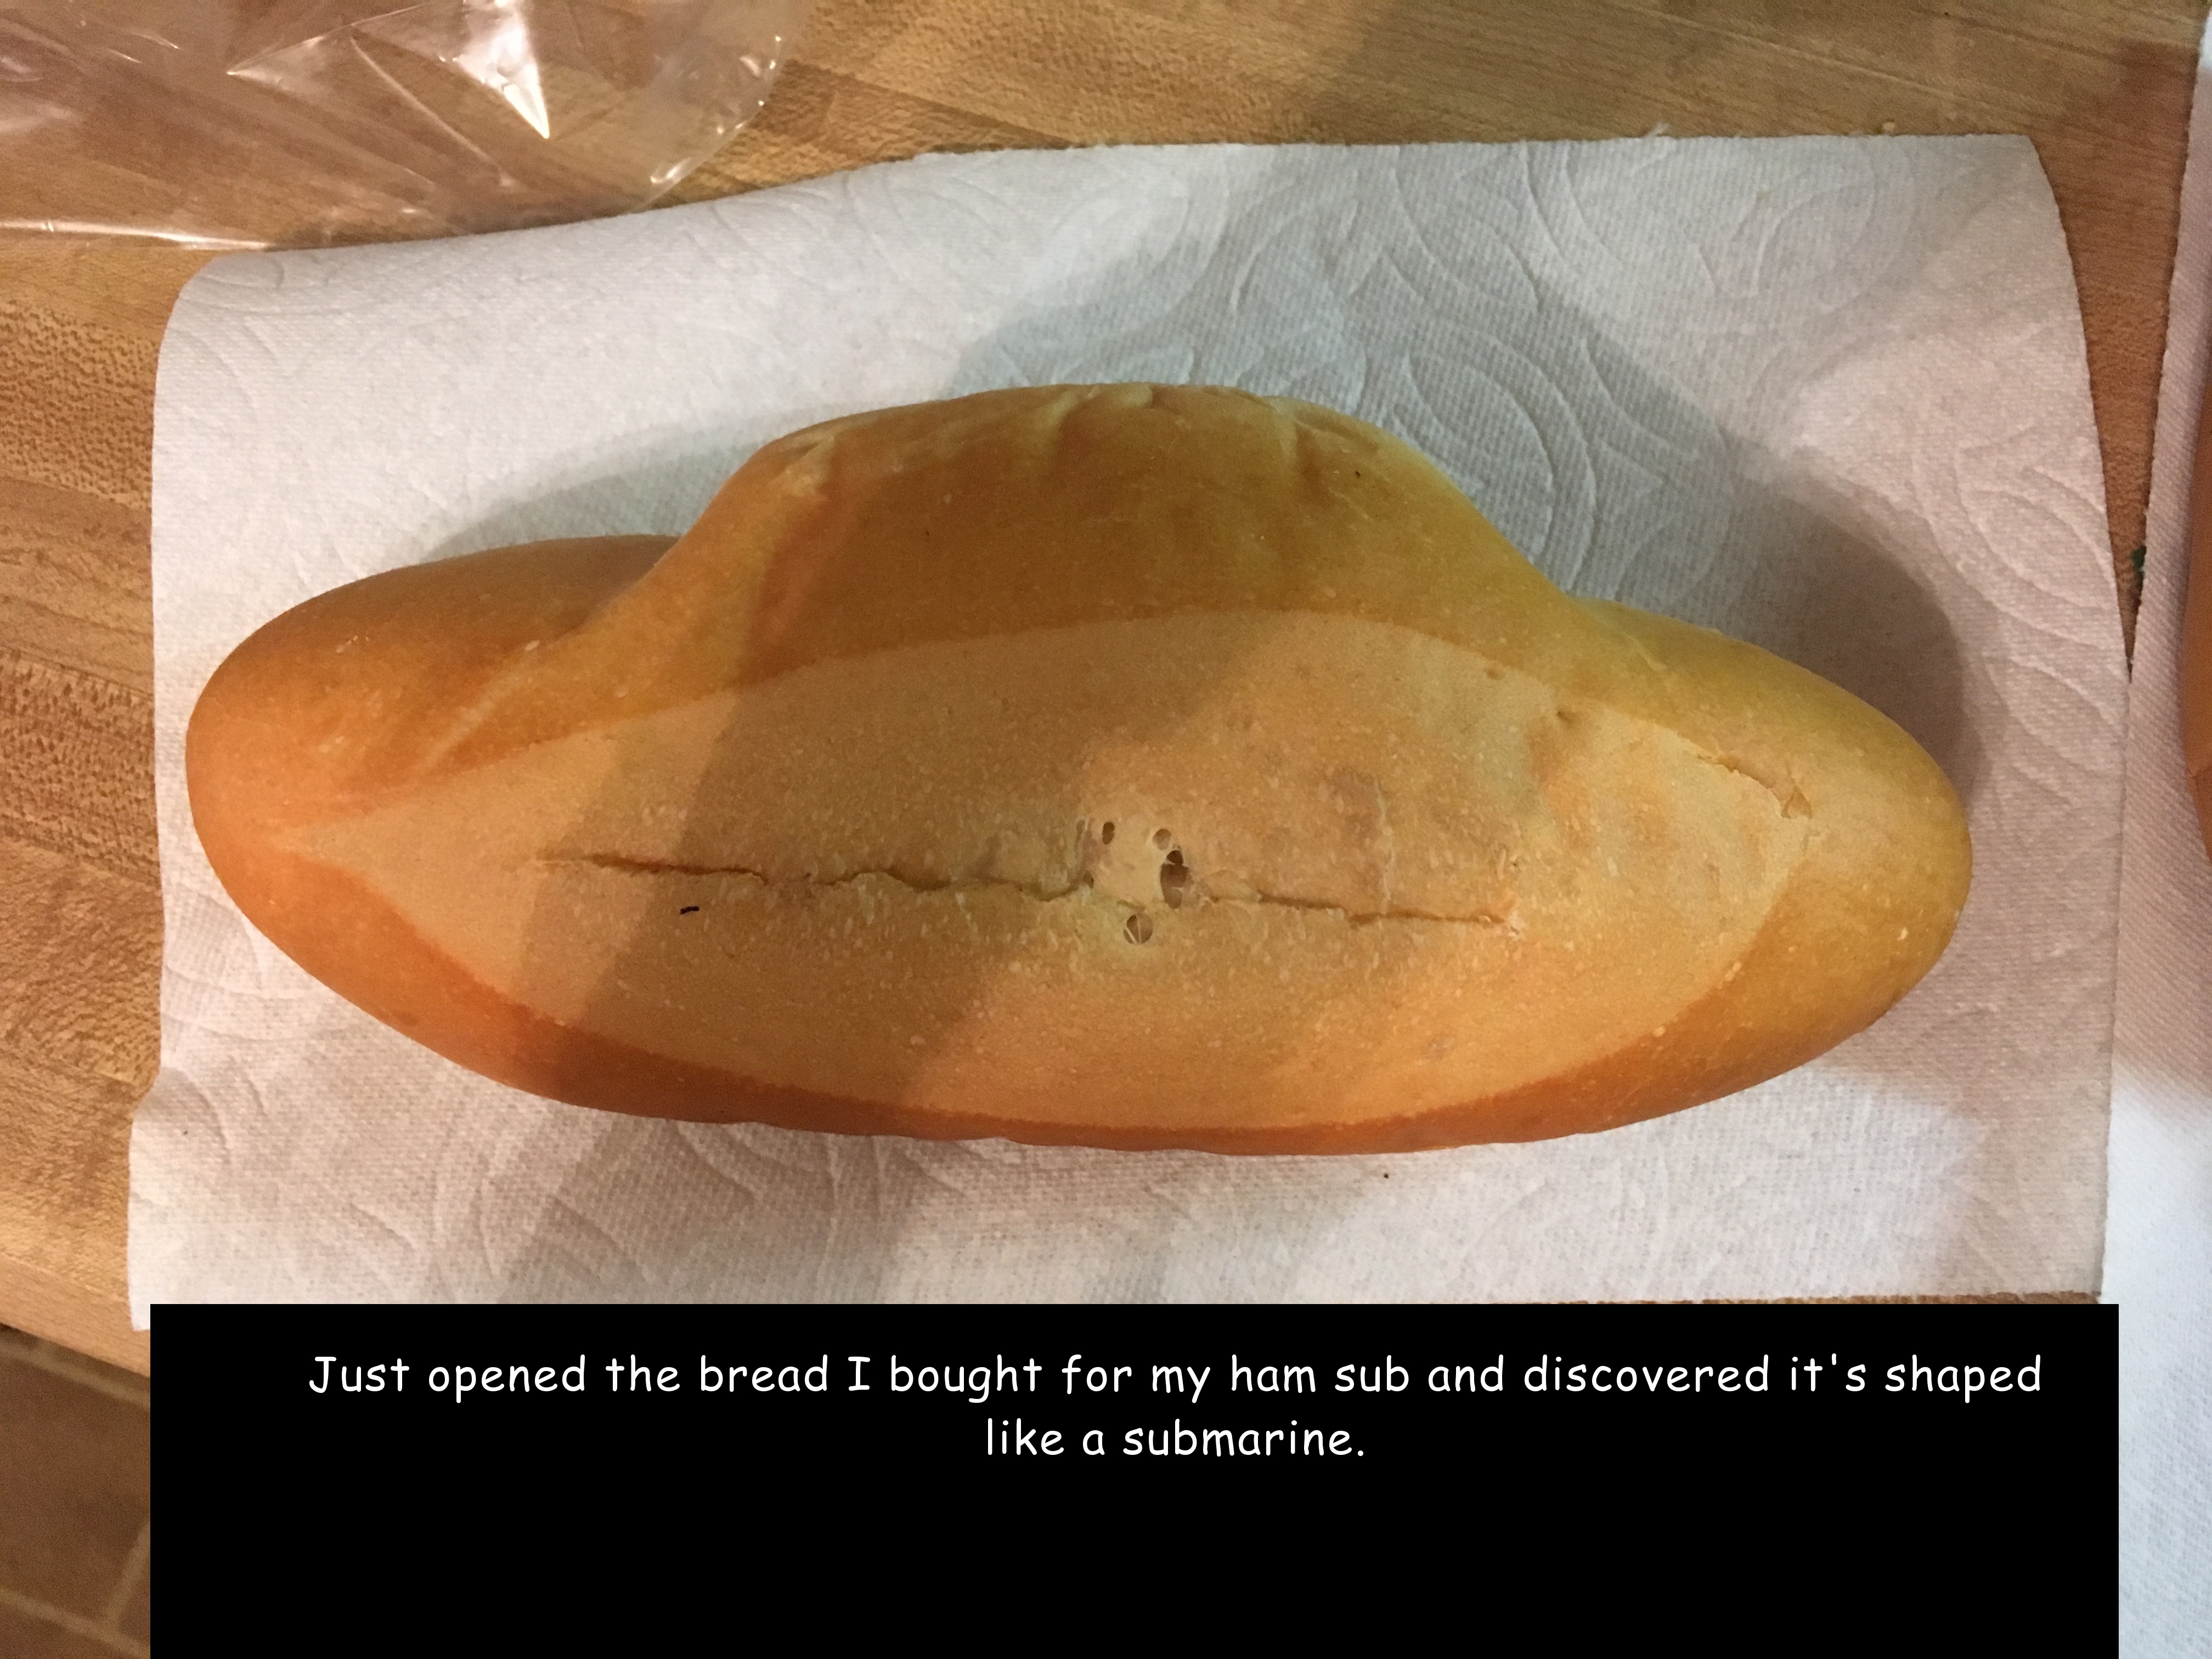 Baked bread that looks like a submarine